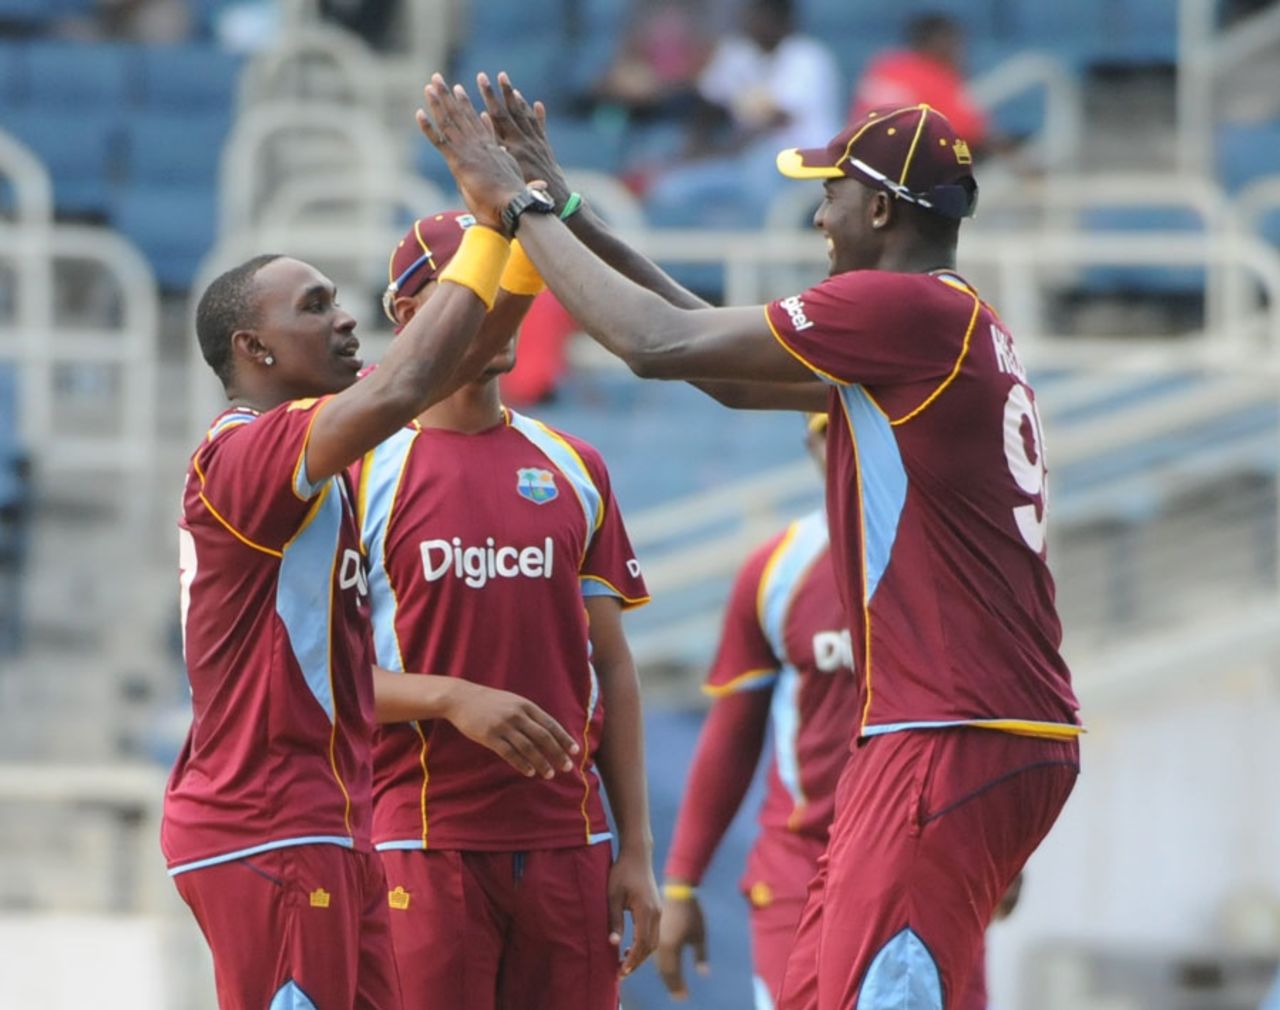 Dwayne Bravo is congratulated after a wicket, West Indies v Ireland, only ODI, Kingston, February 23, 2014